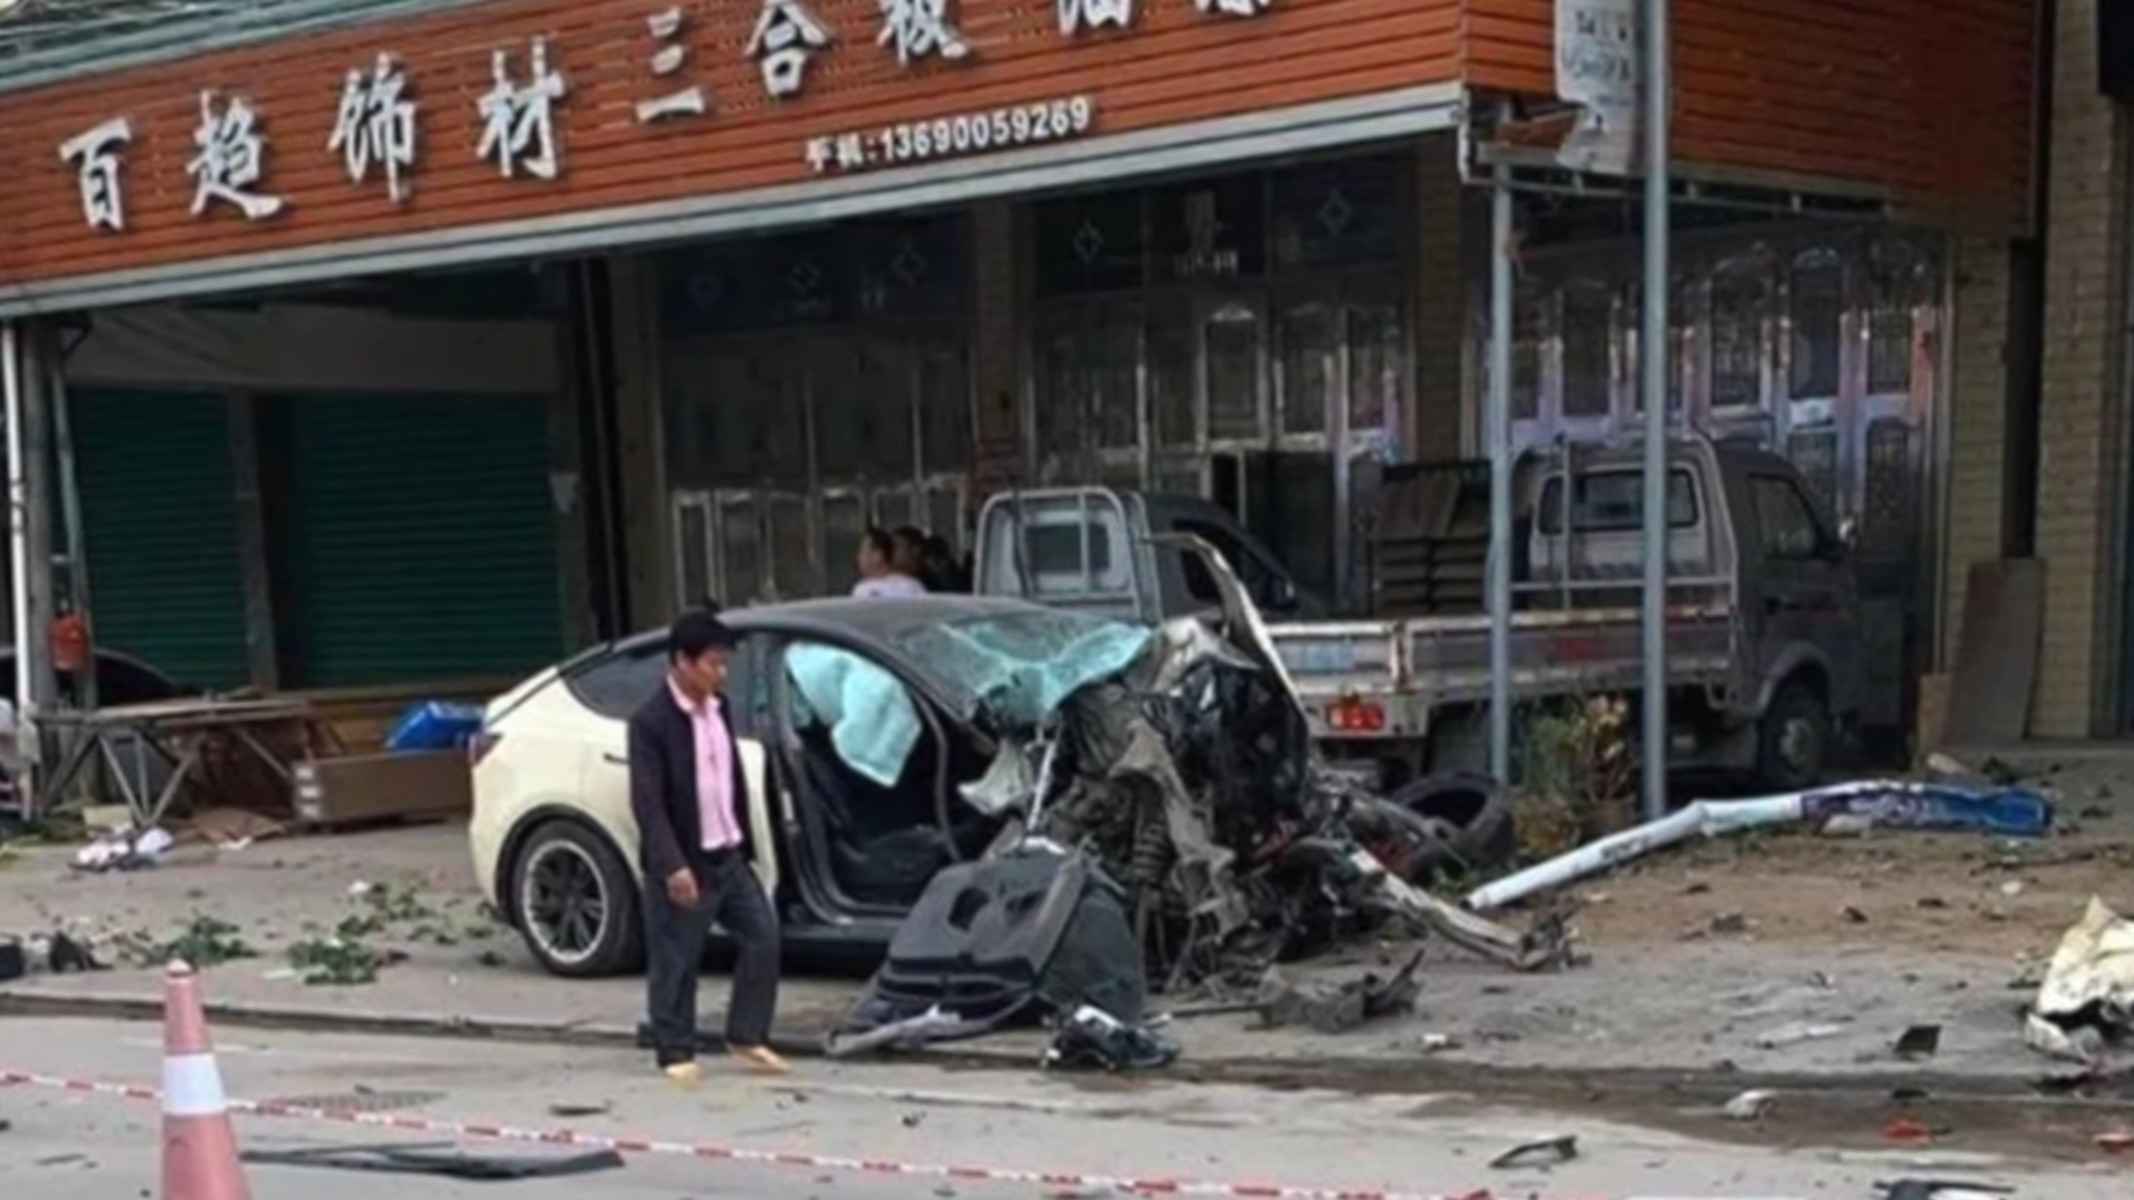 Tesla denies malfunction to blame for deadly crash caught on video in China 0 45 screenshot 1